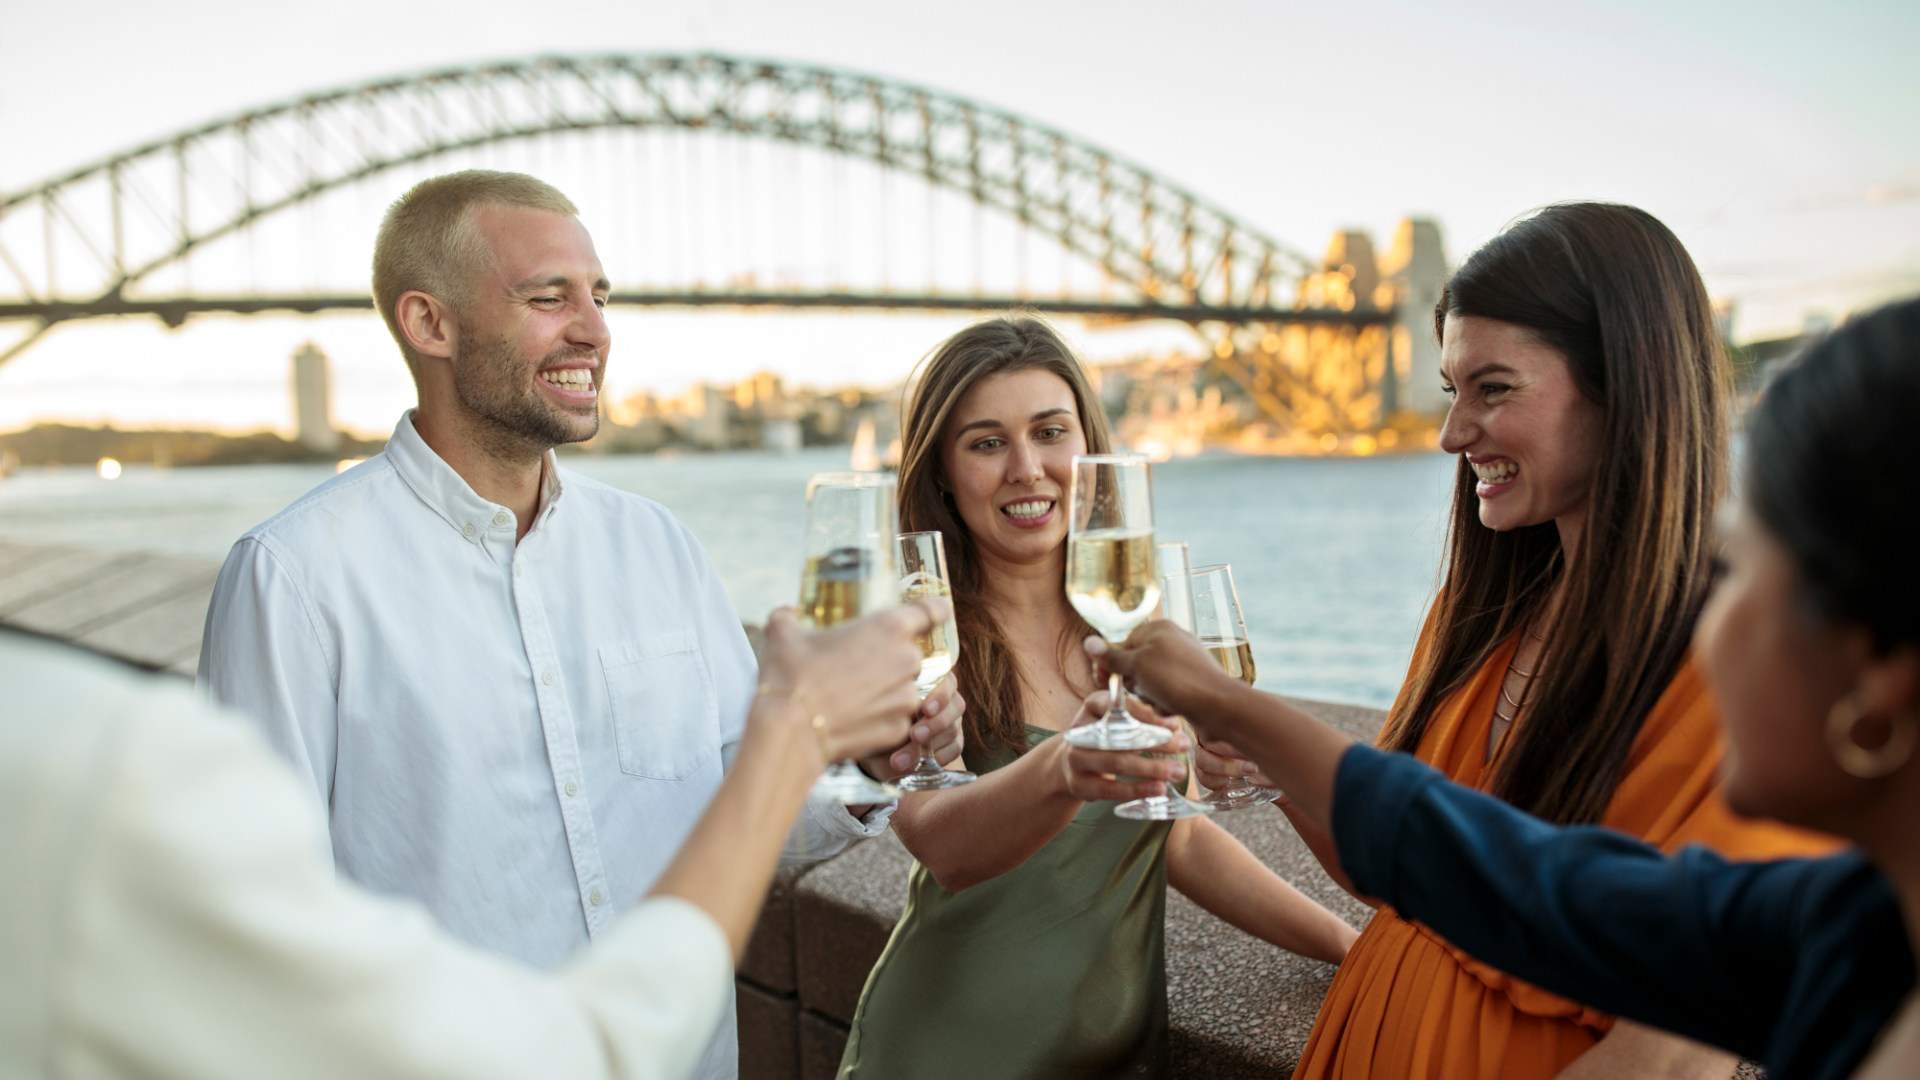 The Sydney Opera House Is Throwing a Luxe Private New Year's Eve Party — and Tickets Are Just $10